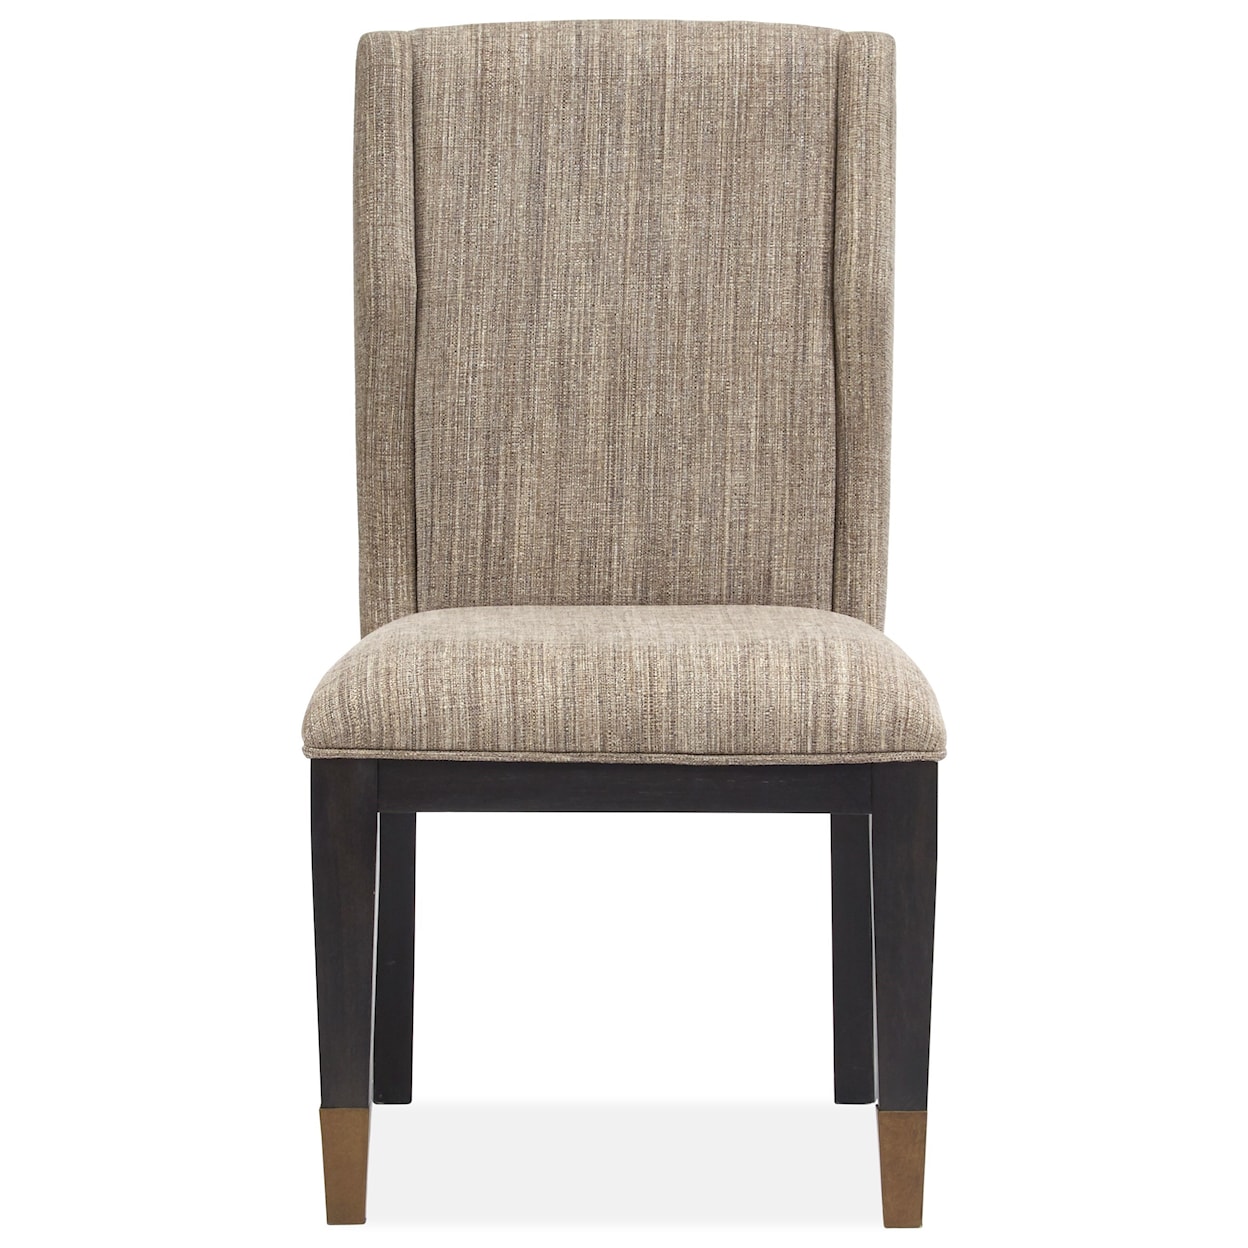 Magnussen Home Ryker Dining Upholstered Dining Side Chair